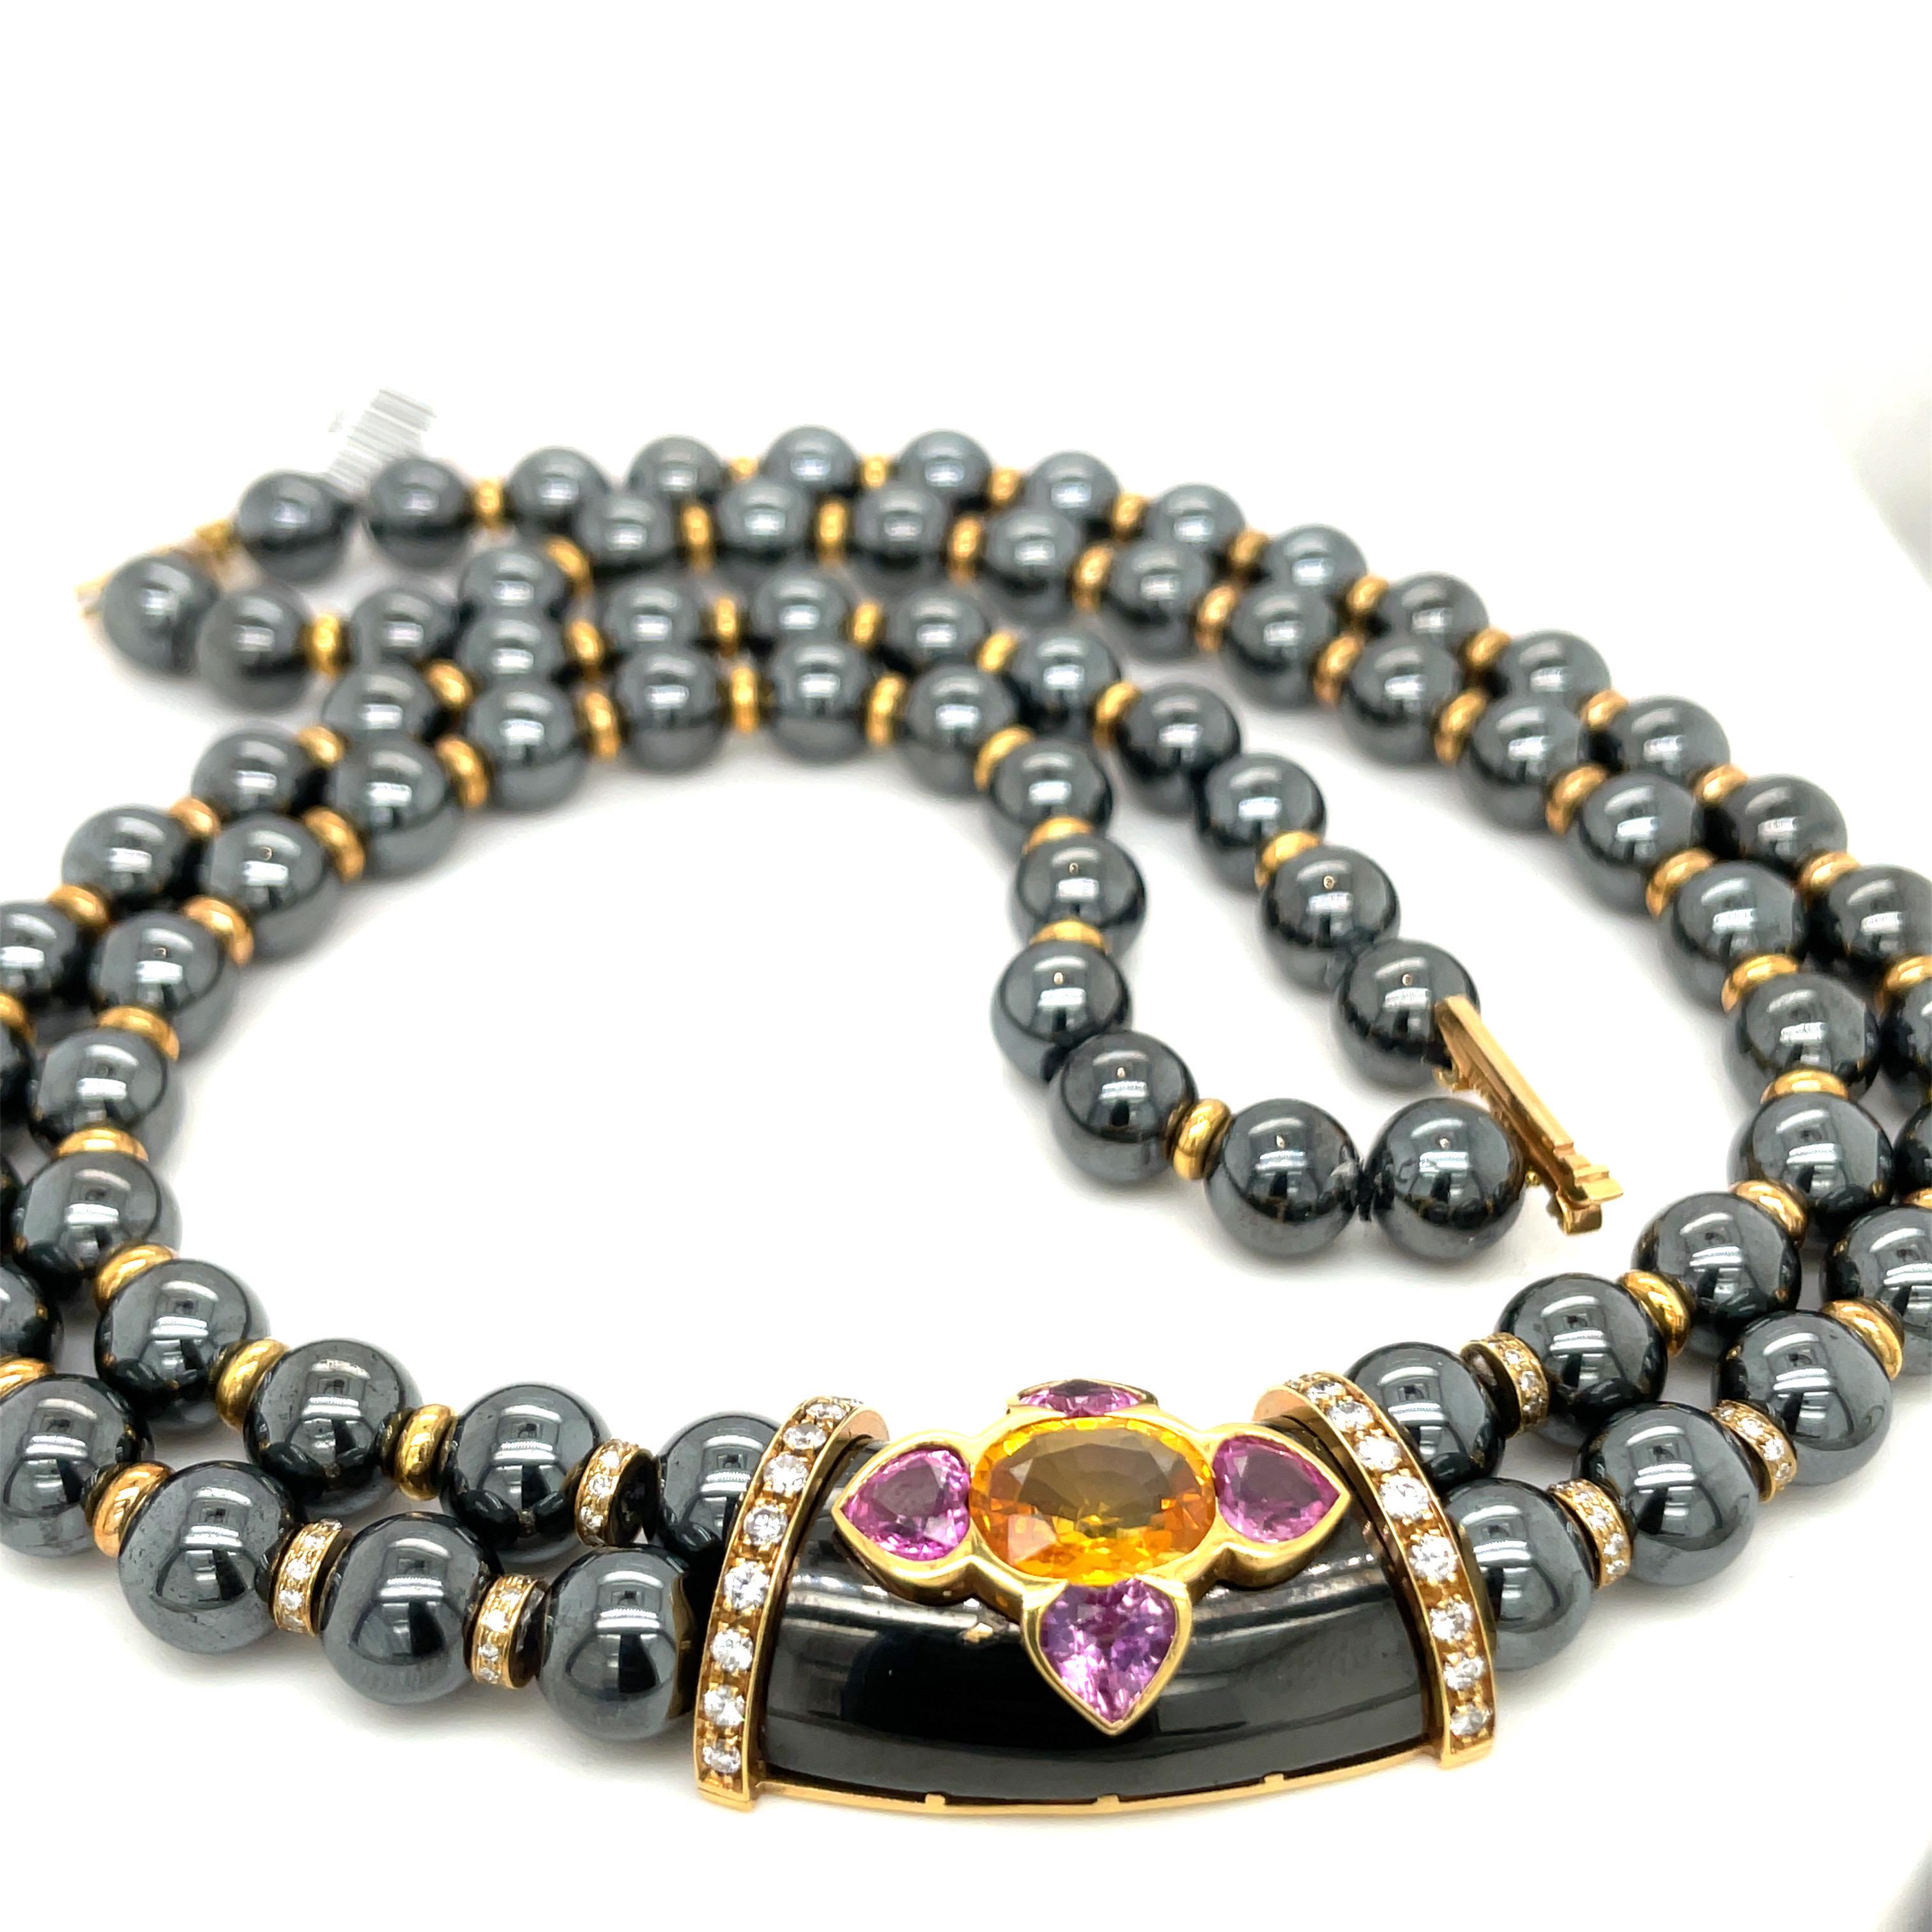 Retro David Morris Hematite Bead Necklace with 1.18Ct Dia. 6.24Ct Pink/Yel Sapphires For Sale